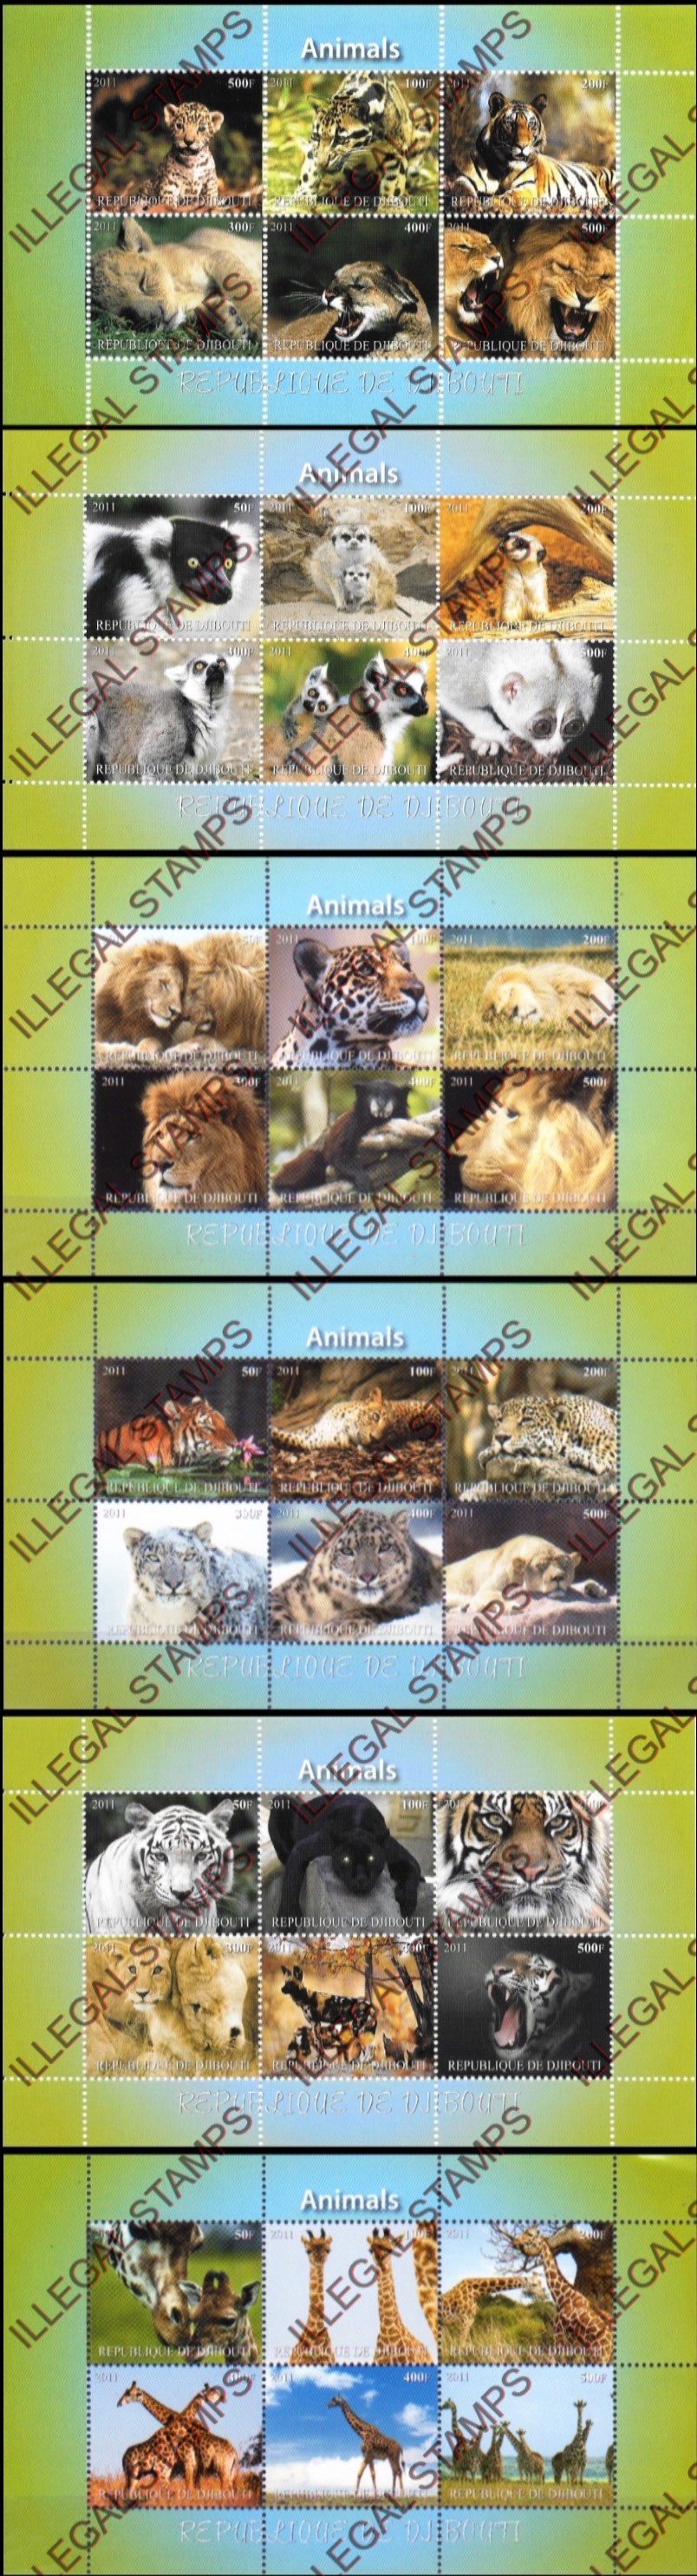 Djibouti 2011 Animals Horizontal Illegal Stamp Sheetlets of 6 with Plain Backgrounds (Part 1)